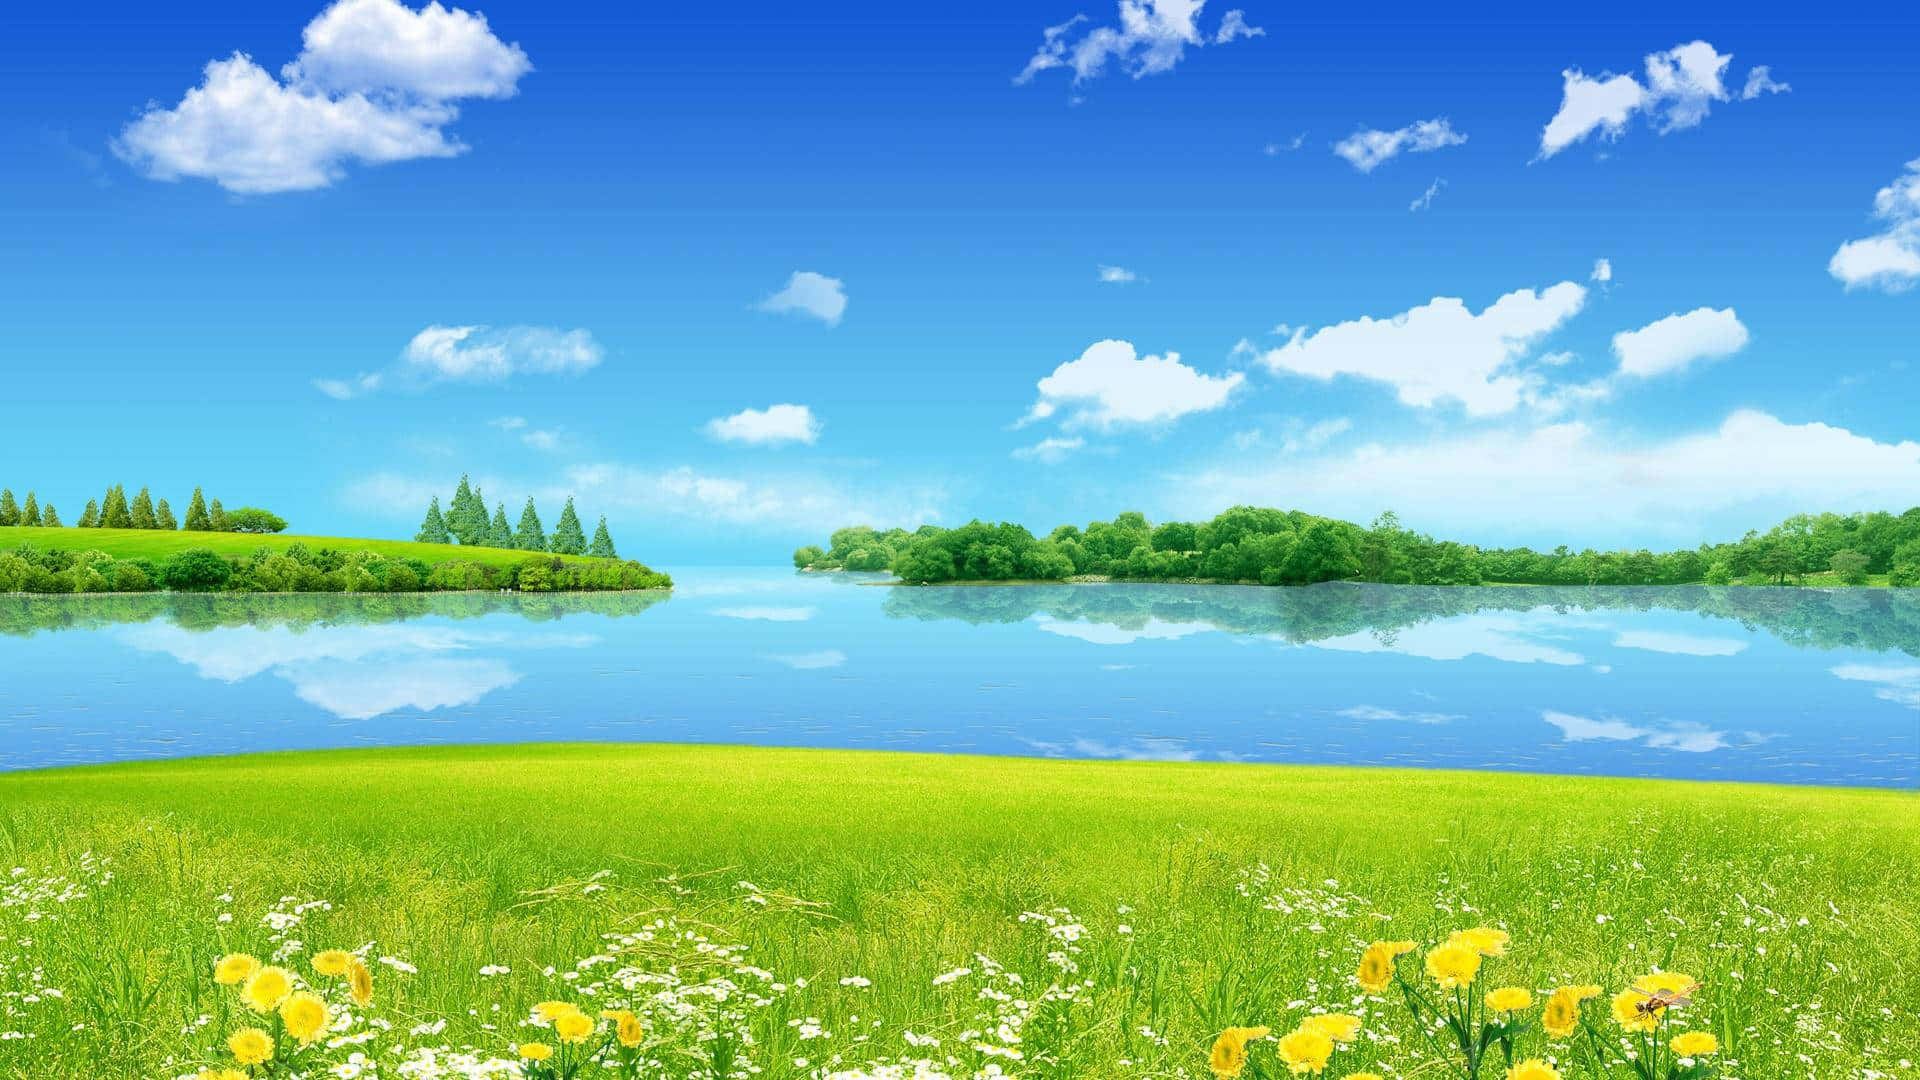 Cool Summer Sunny Day Wallpaper